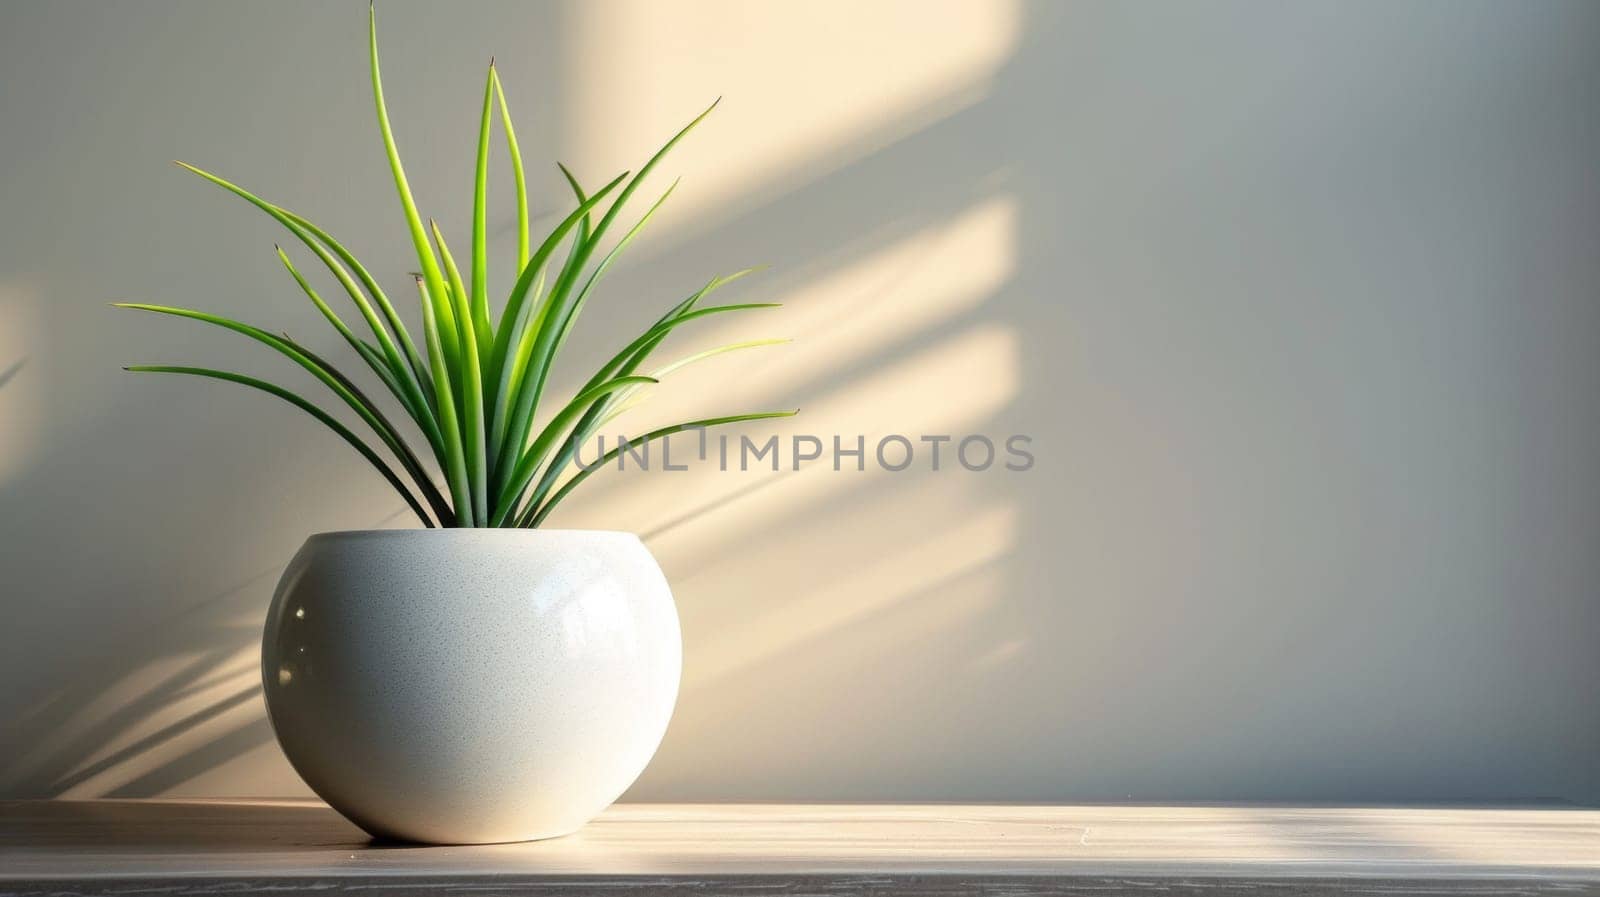 A white vase with a plant in it on the table